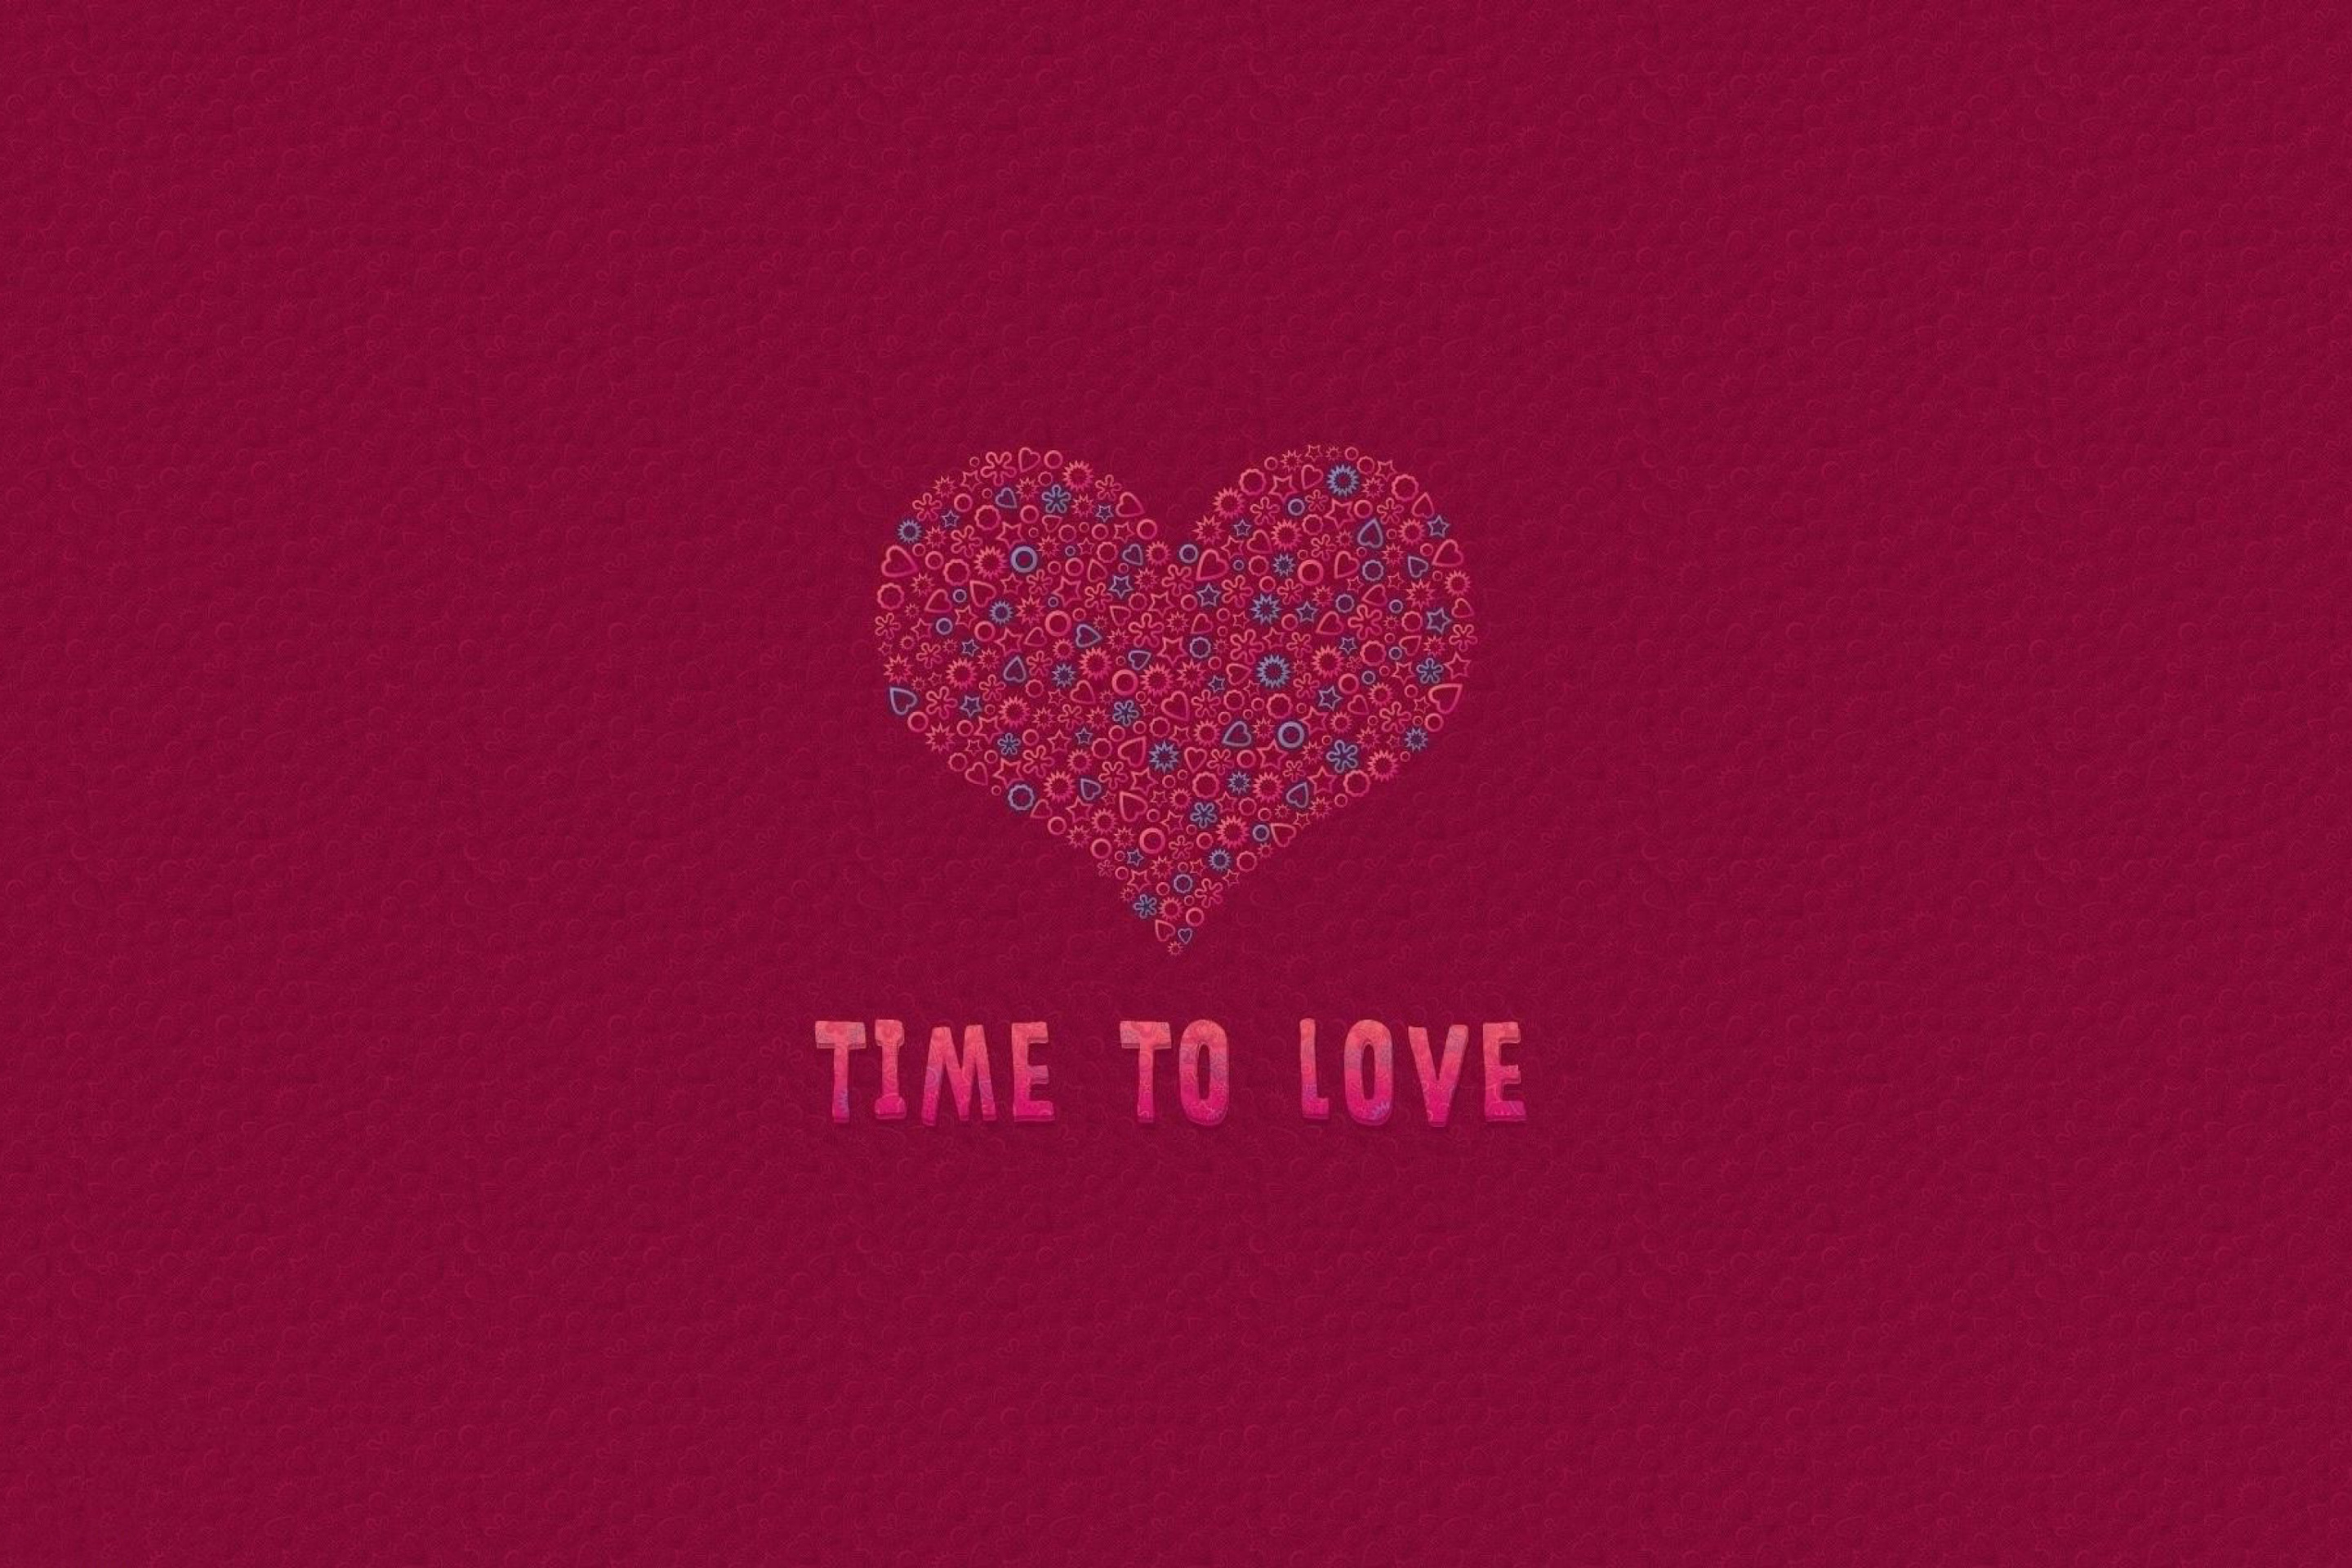 Time to Love wallpaper 2880x1920